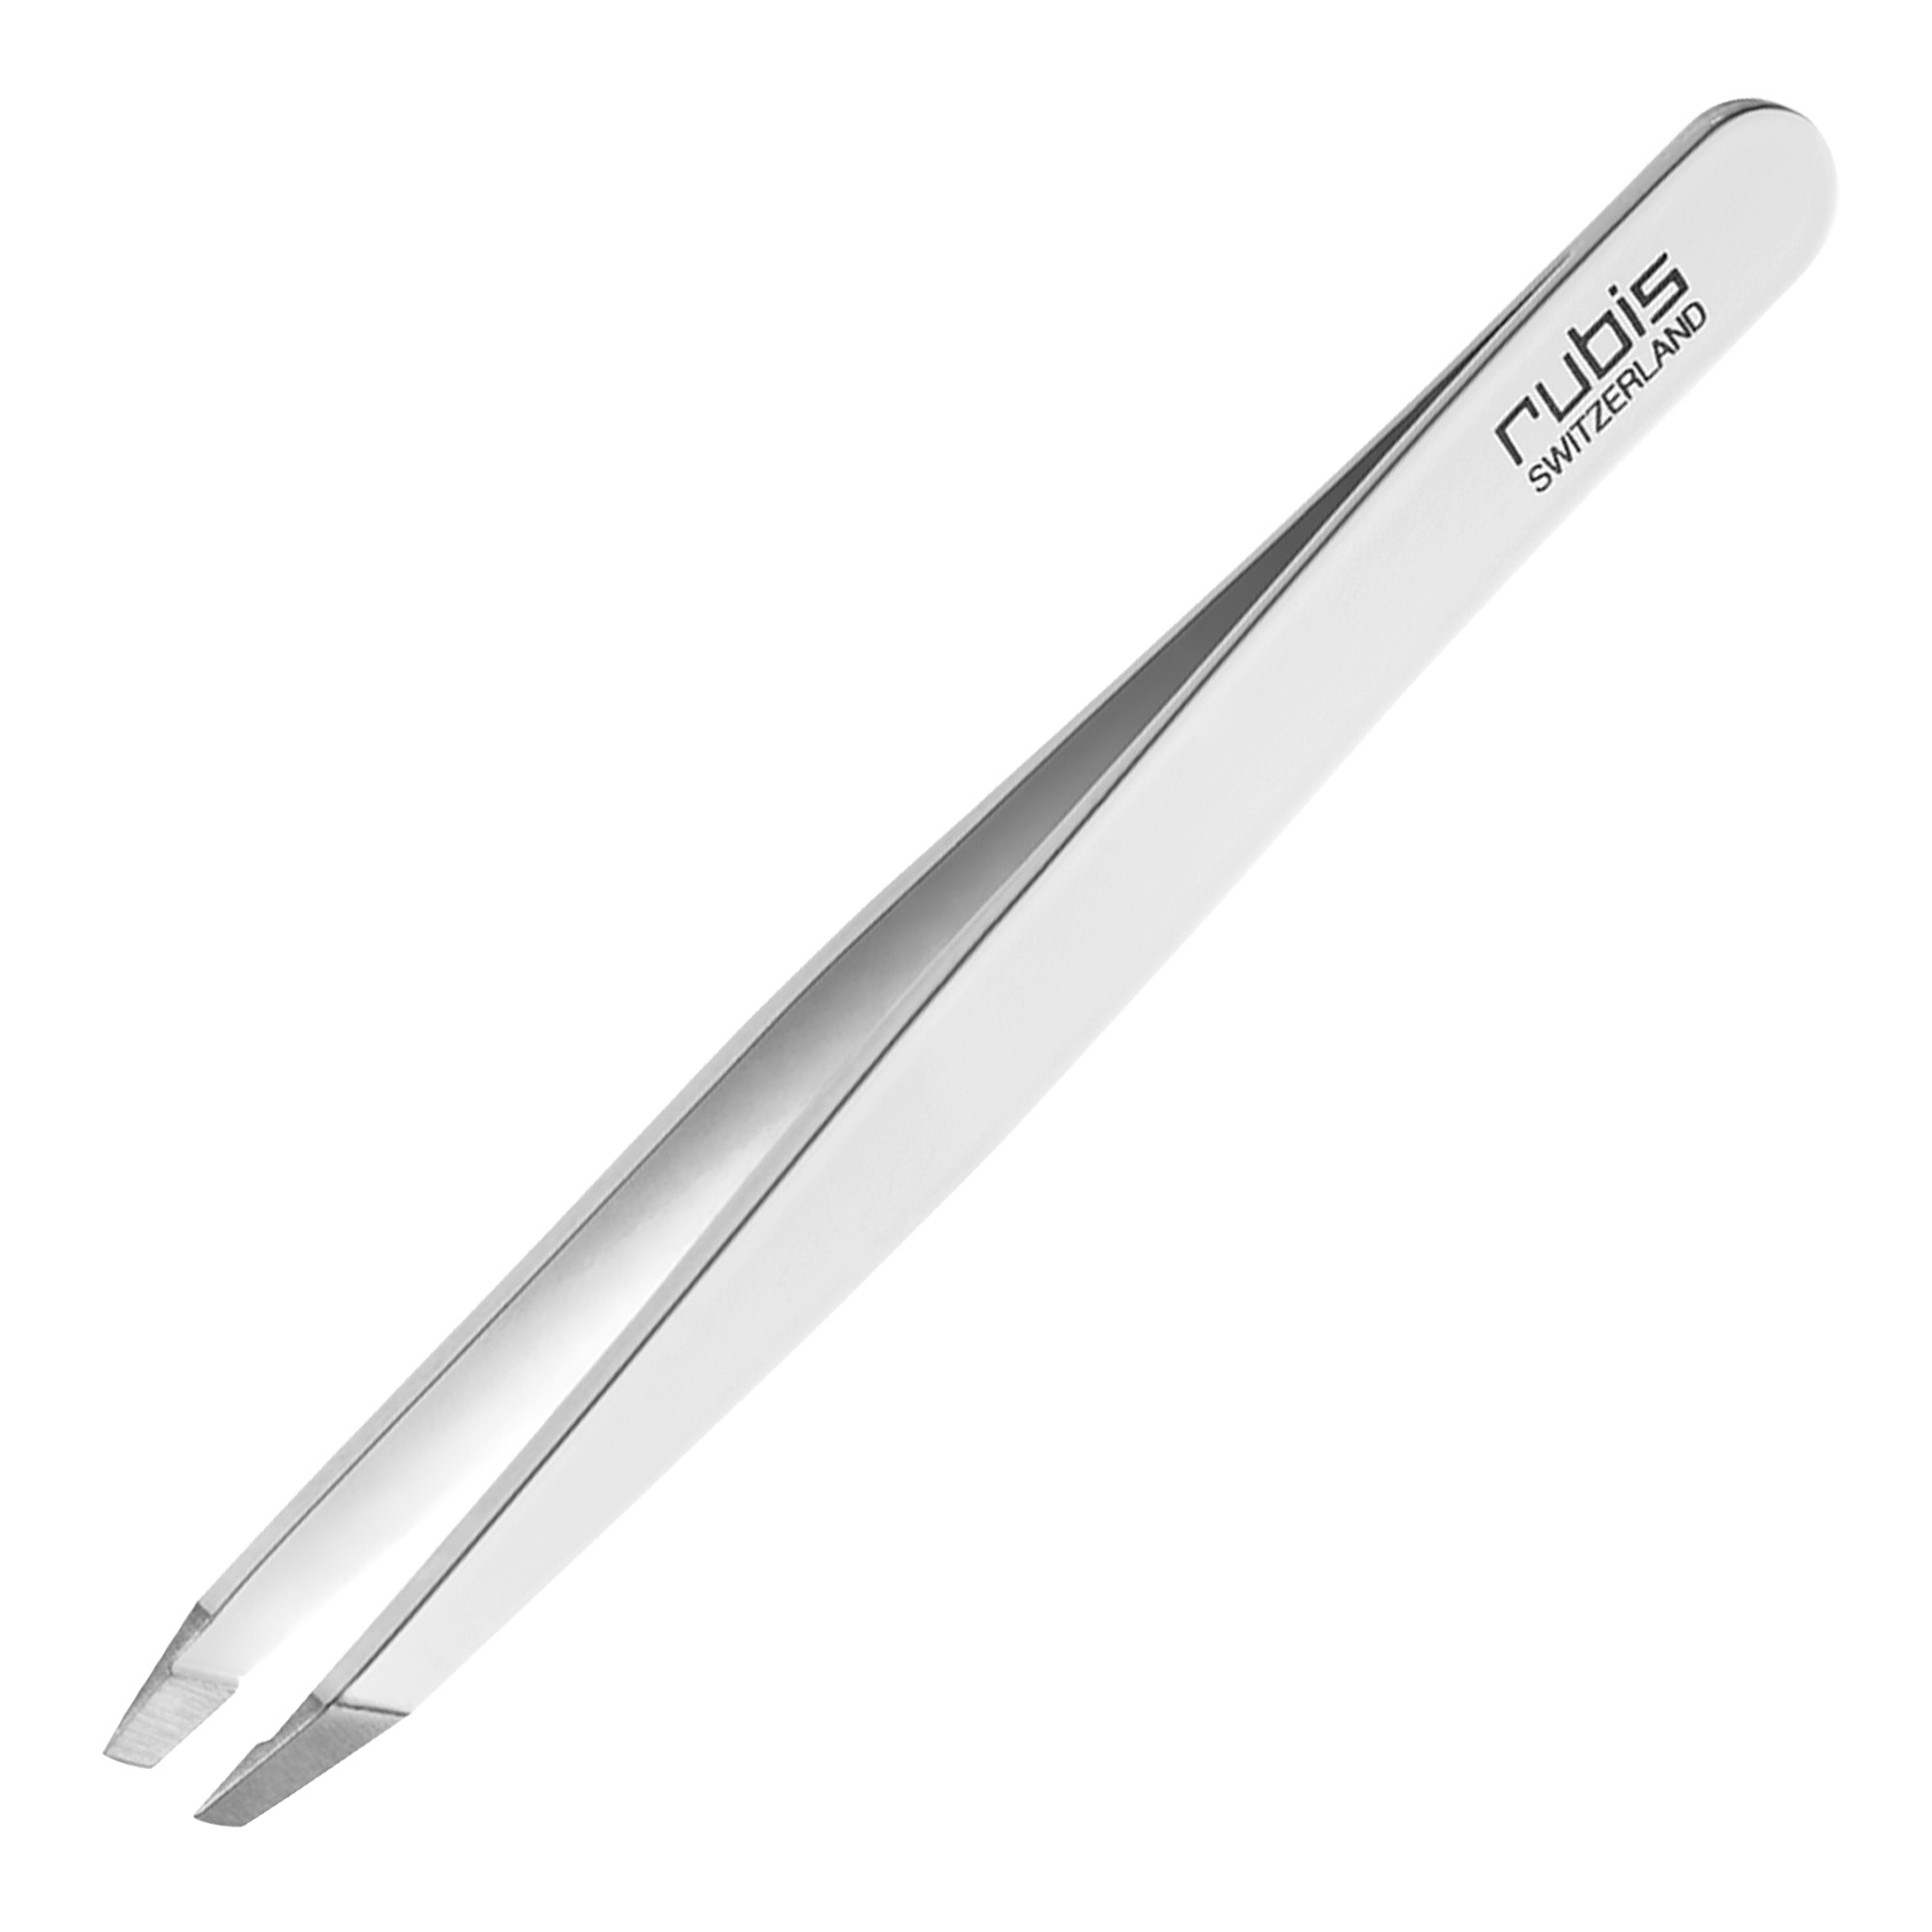 Rubis stainless steel tweezers with slant tip white